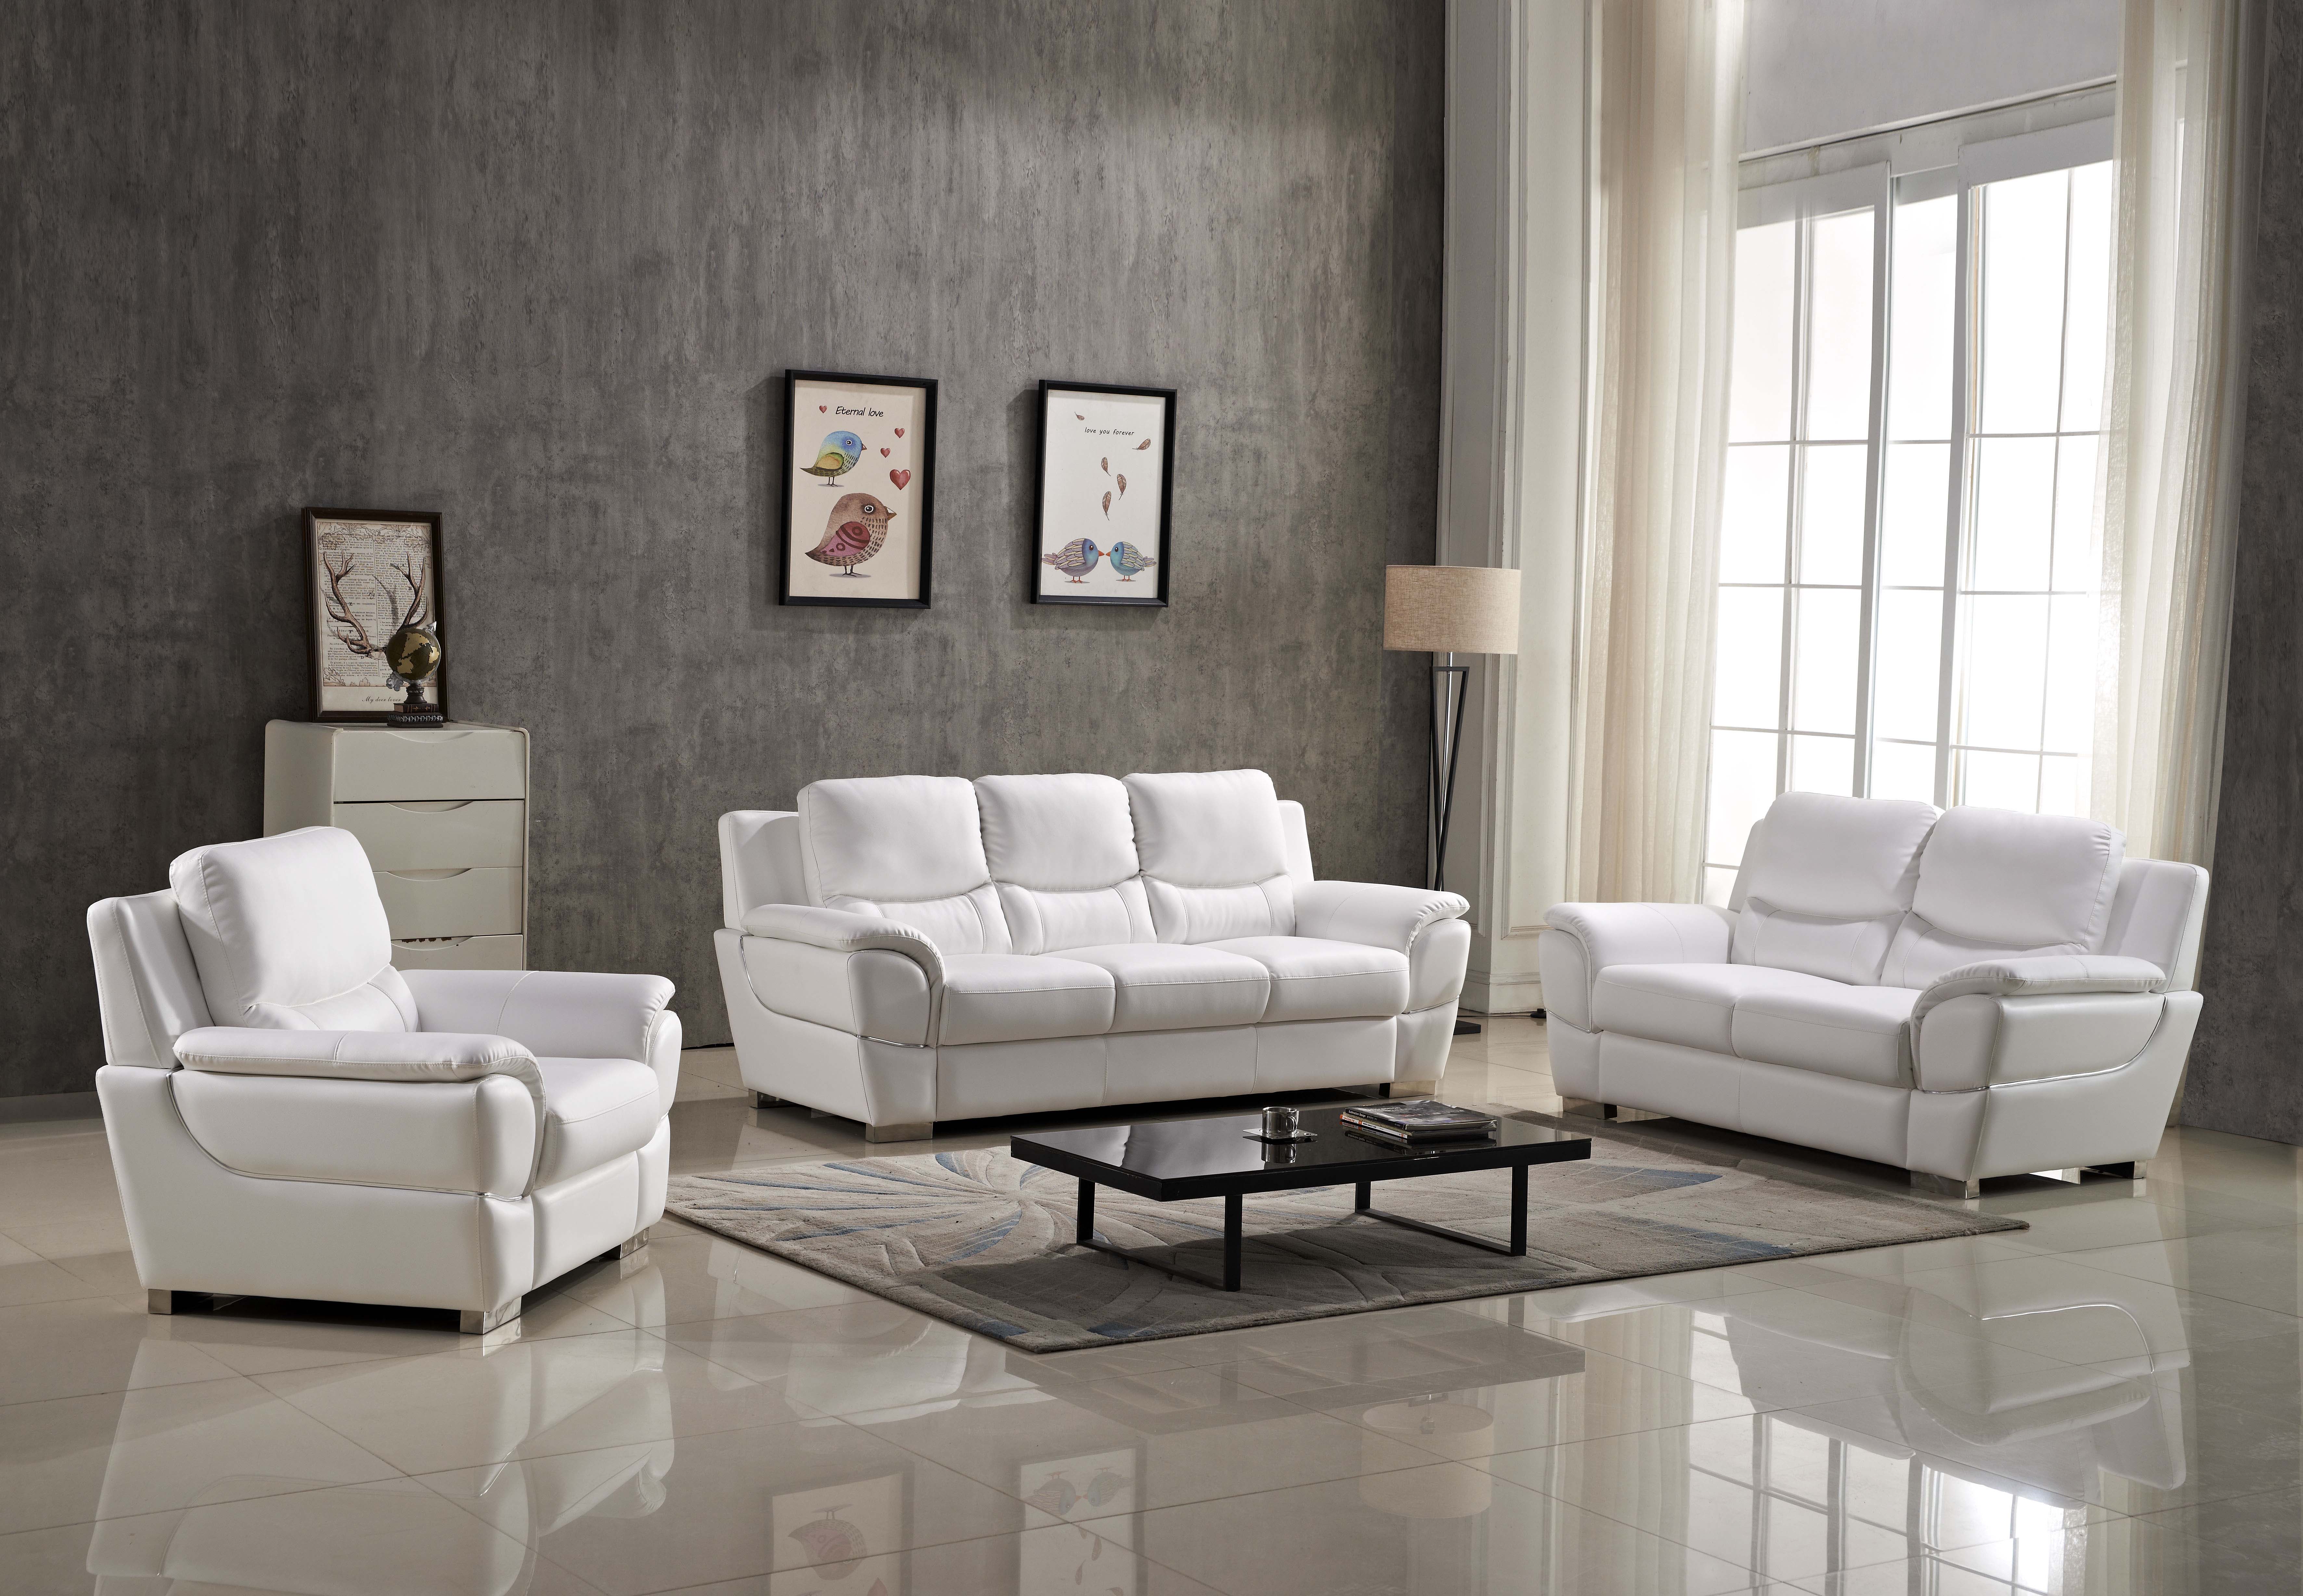 Kartier Leather Sofa Set White, White Leather Living Room Sets